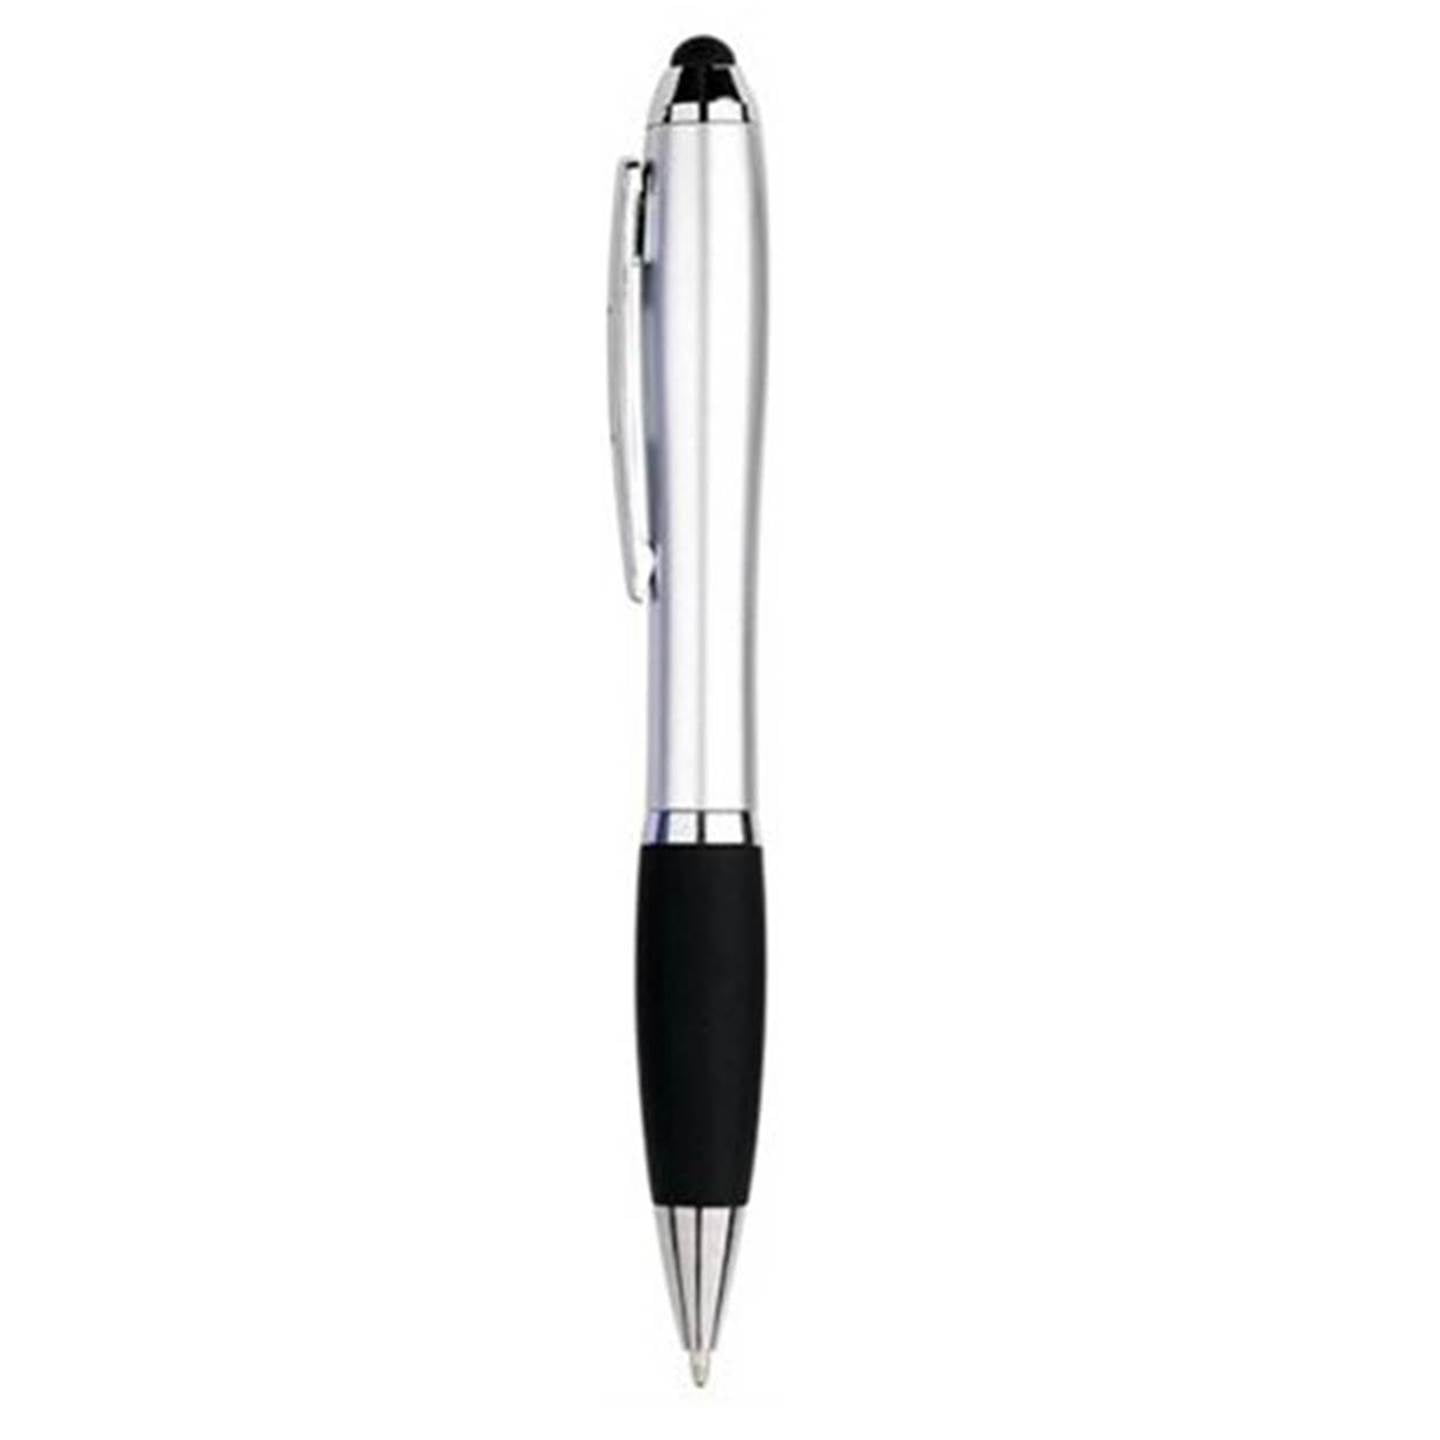 Ballpoint Pen iPad iPhone Galaxy Smartphone Tablet PC 2in1 Touch Screen Stylus 